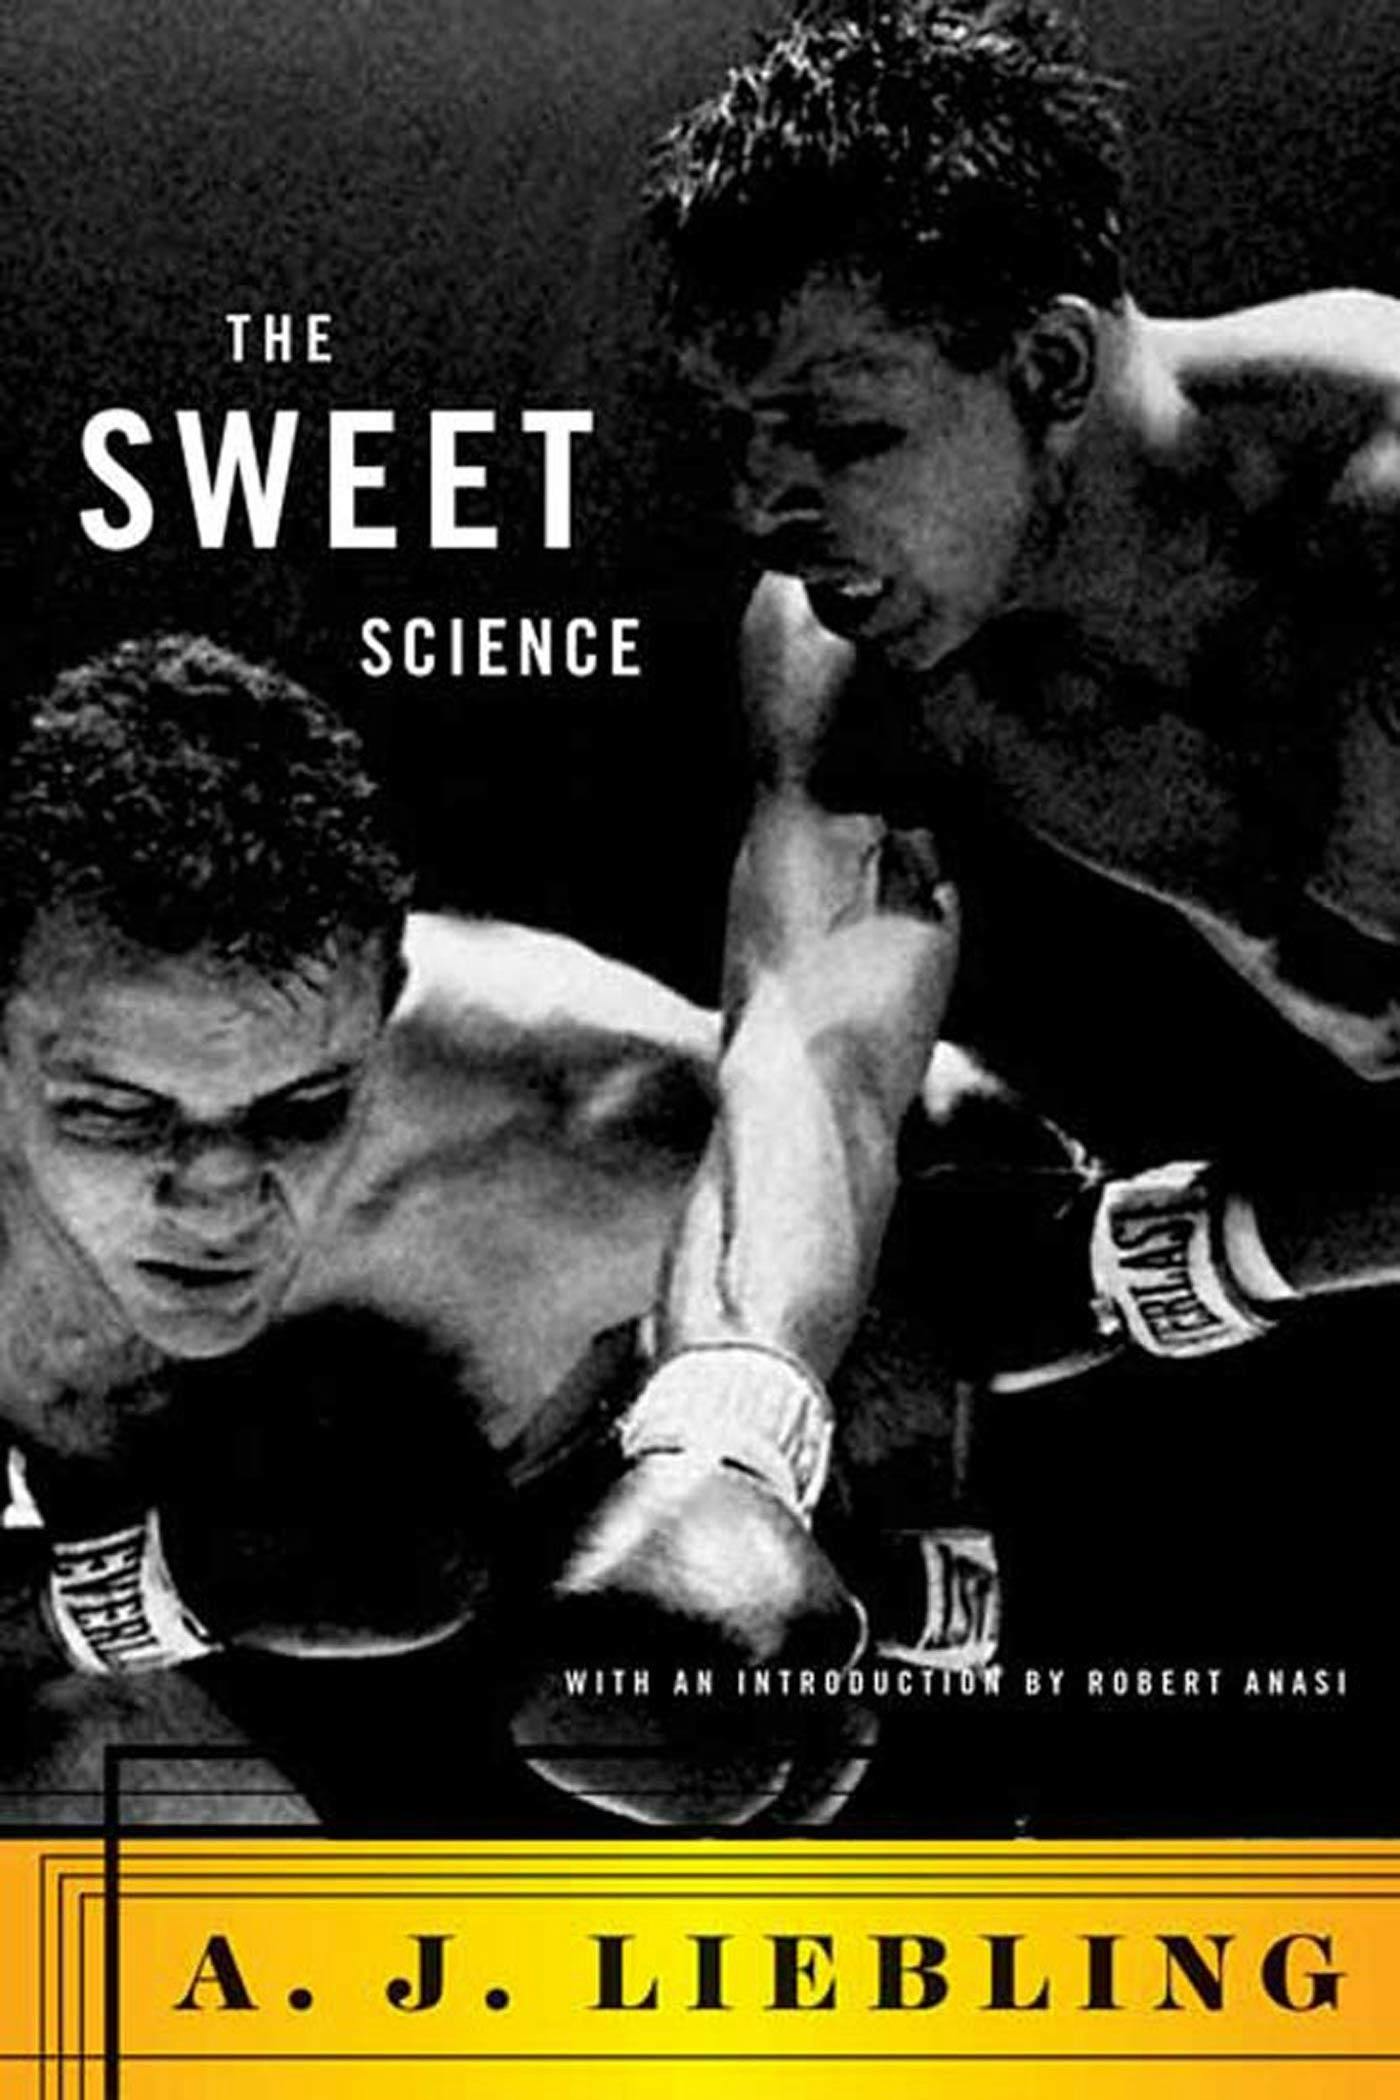 : The Sweet Science / The Earl of Louisiana / The Jollity Building / Between Meals / The Press A J Liebling: The Sweet Science and Other Writings LOA #191 